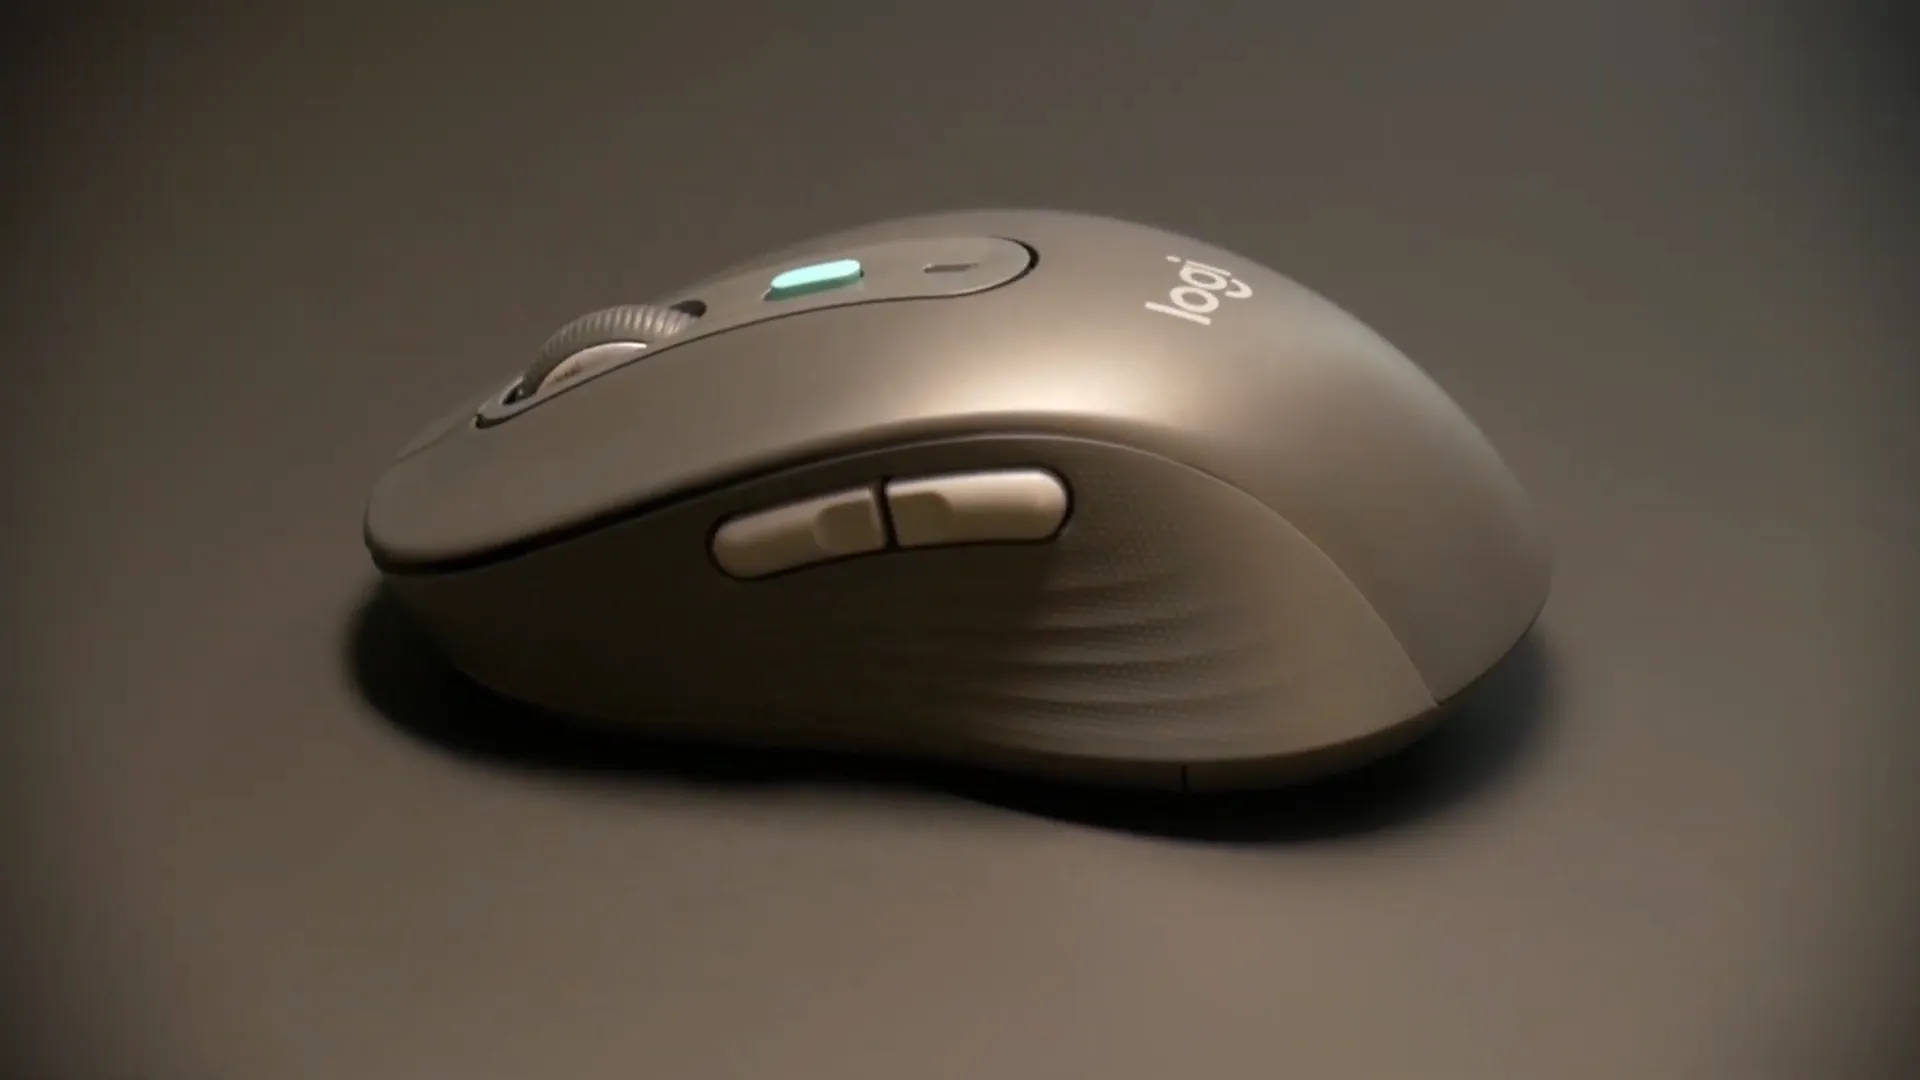  Logitech's booked a seat on the AI hype train with its new AI Prompt Builder and forthcoming AI button-enabled mouse 